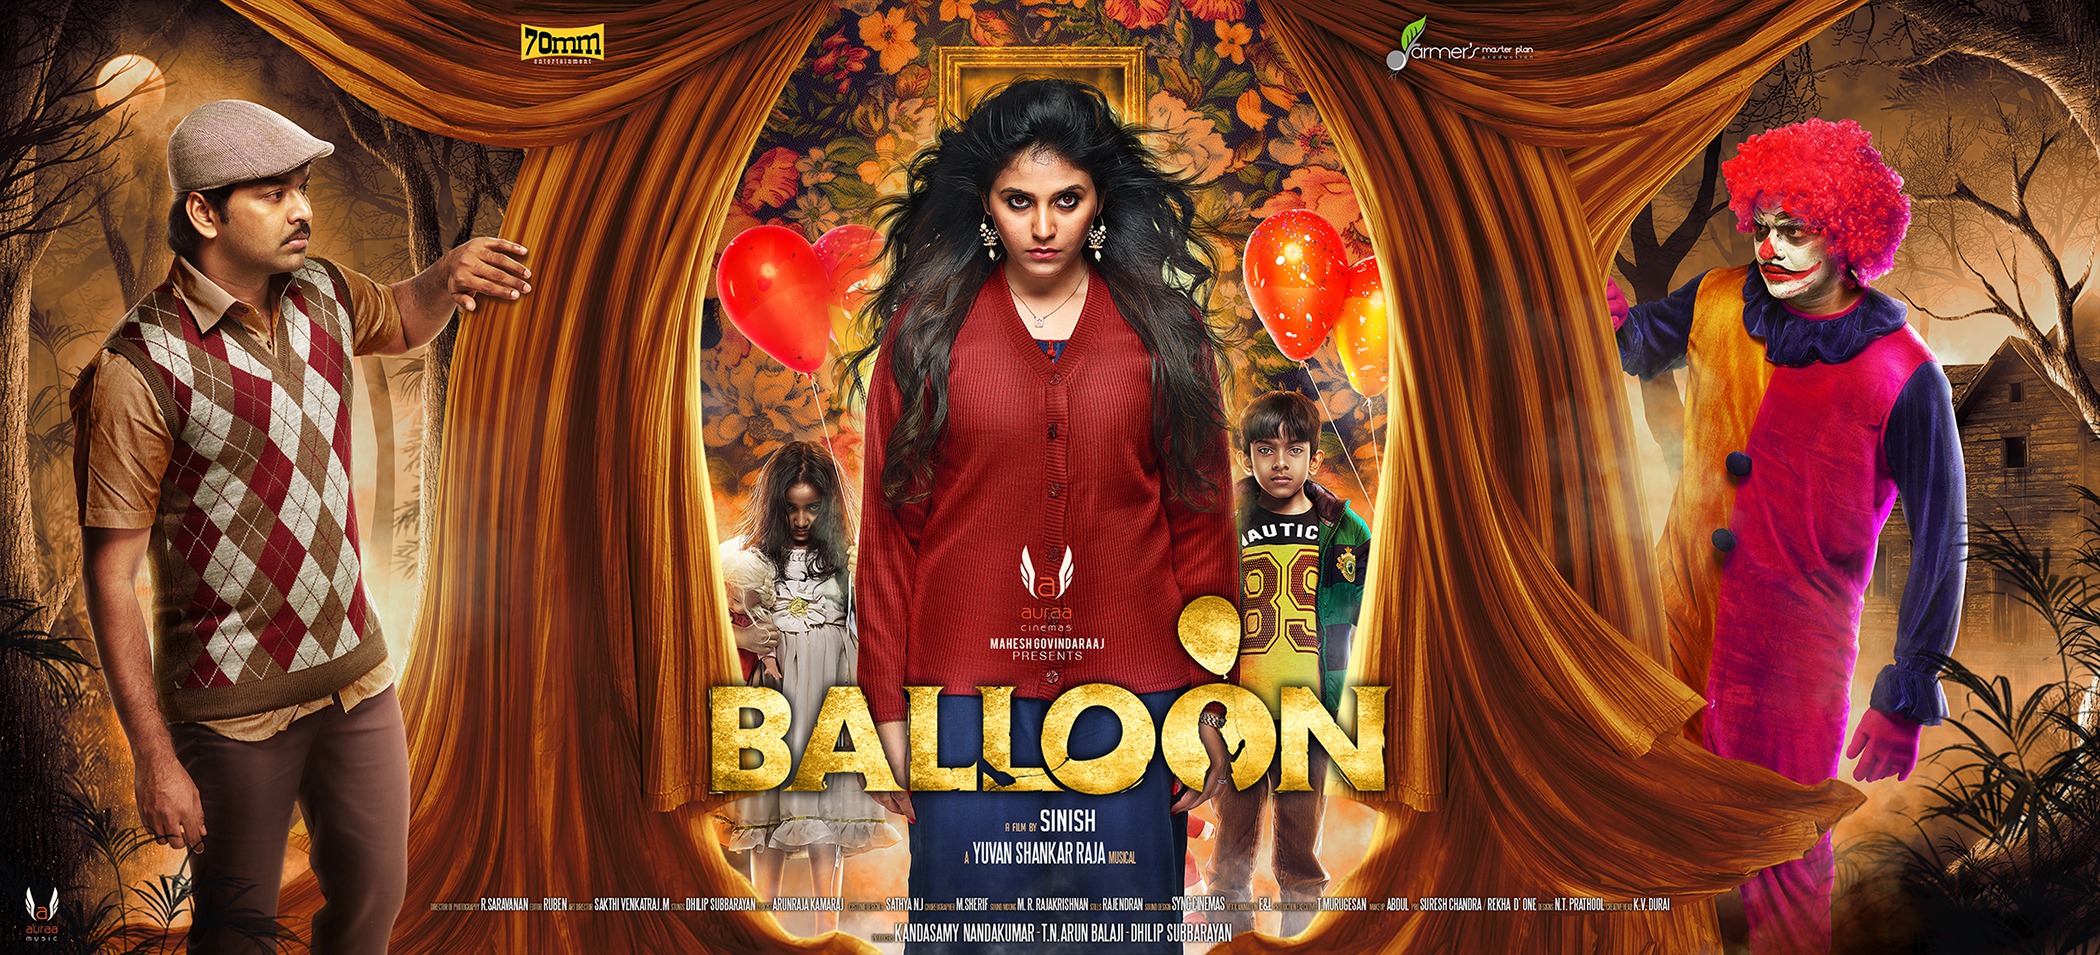 Mega Sized Movie Poster Image for Balloon (#5 of 8)